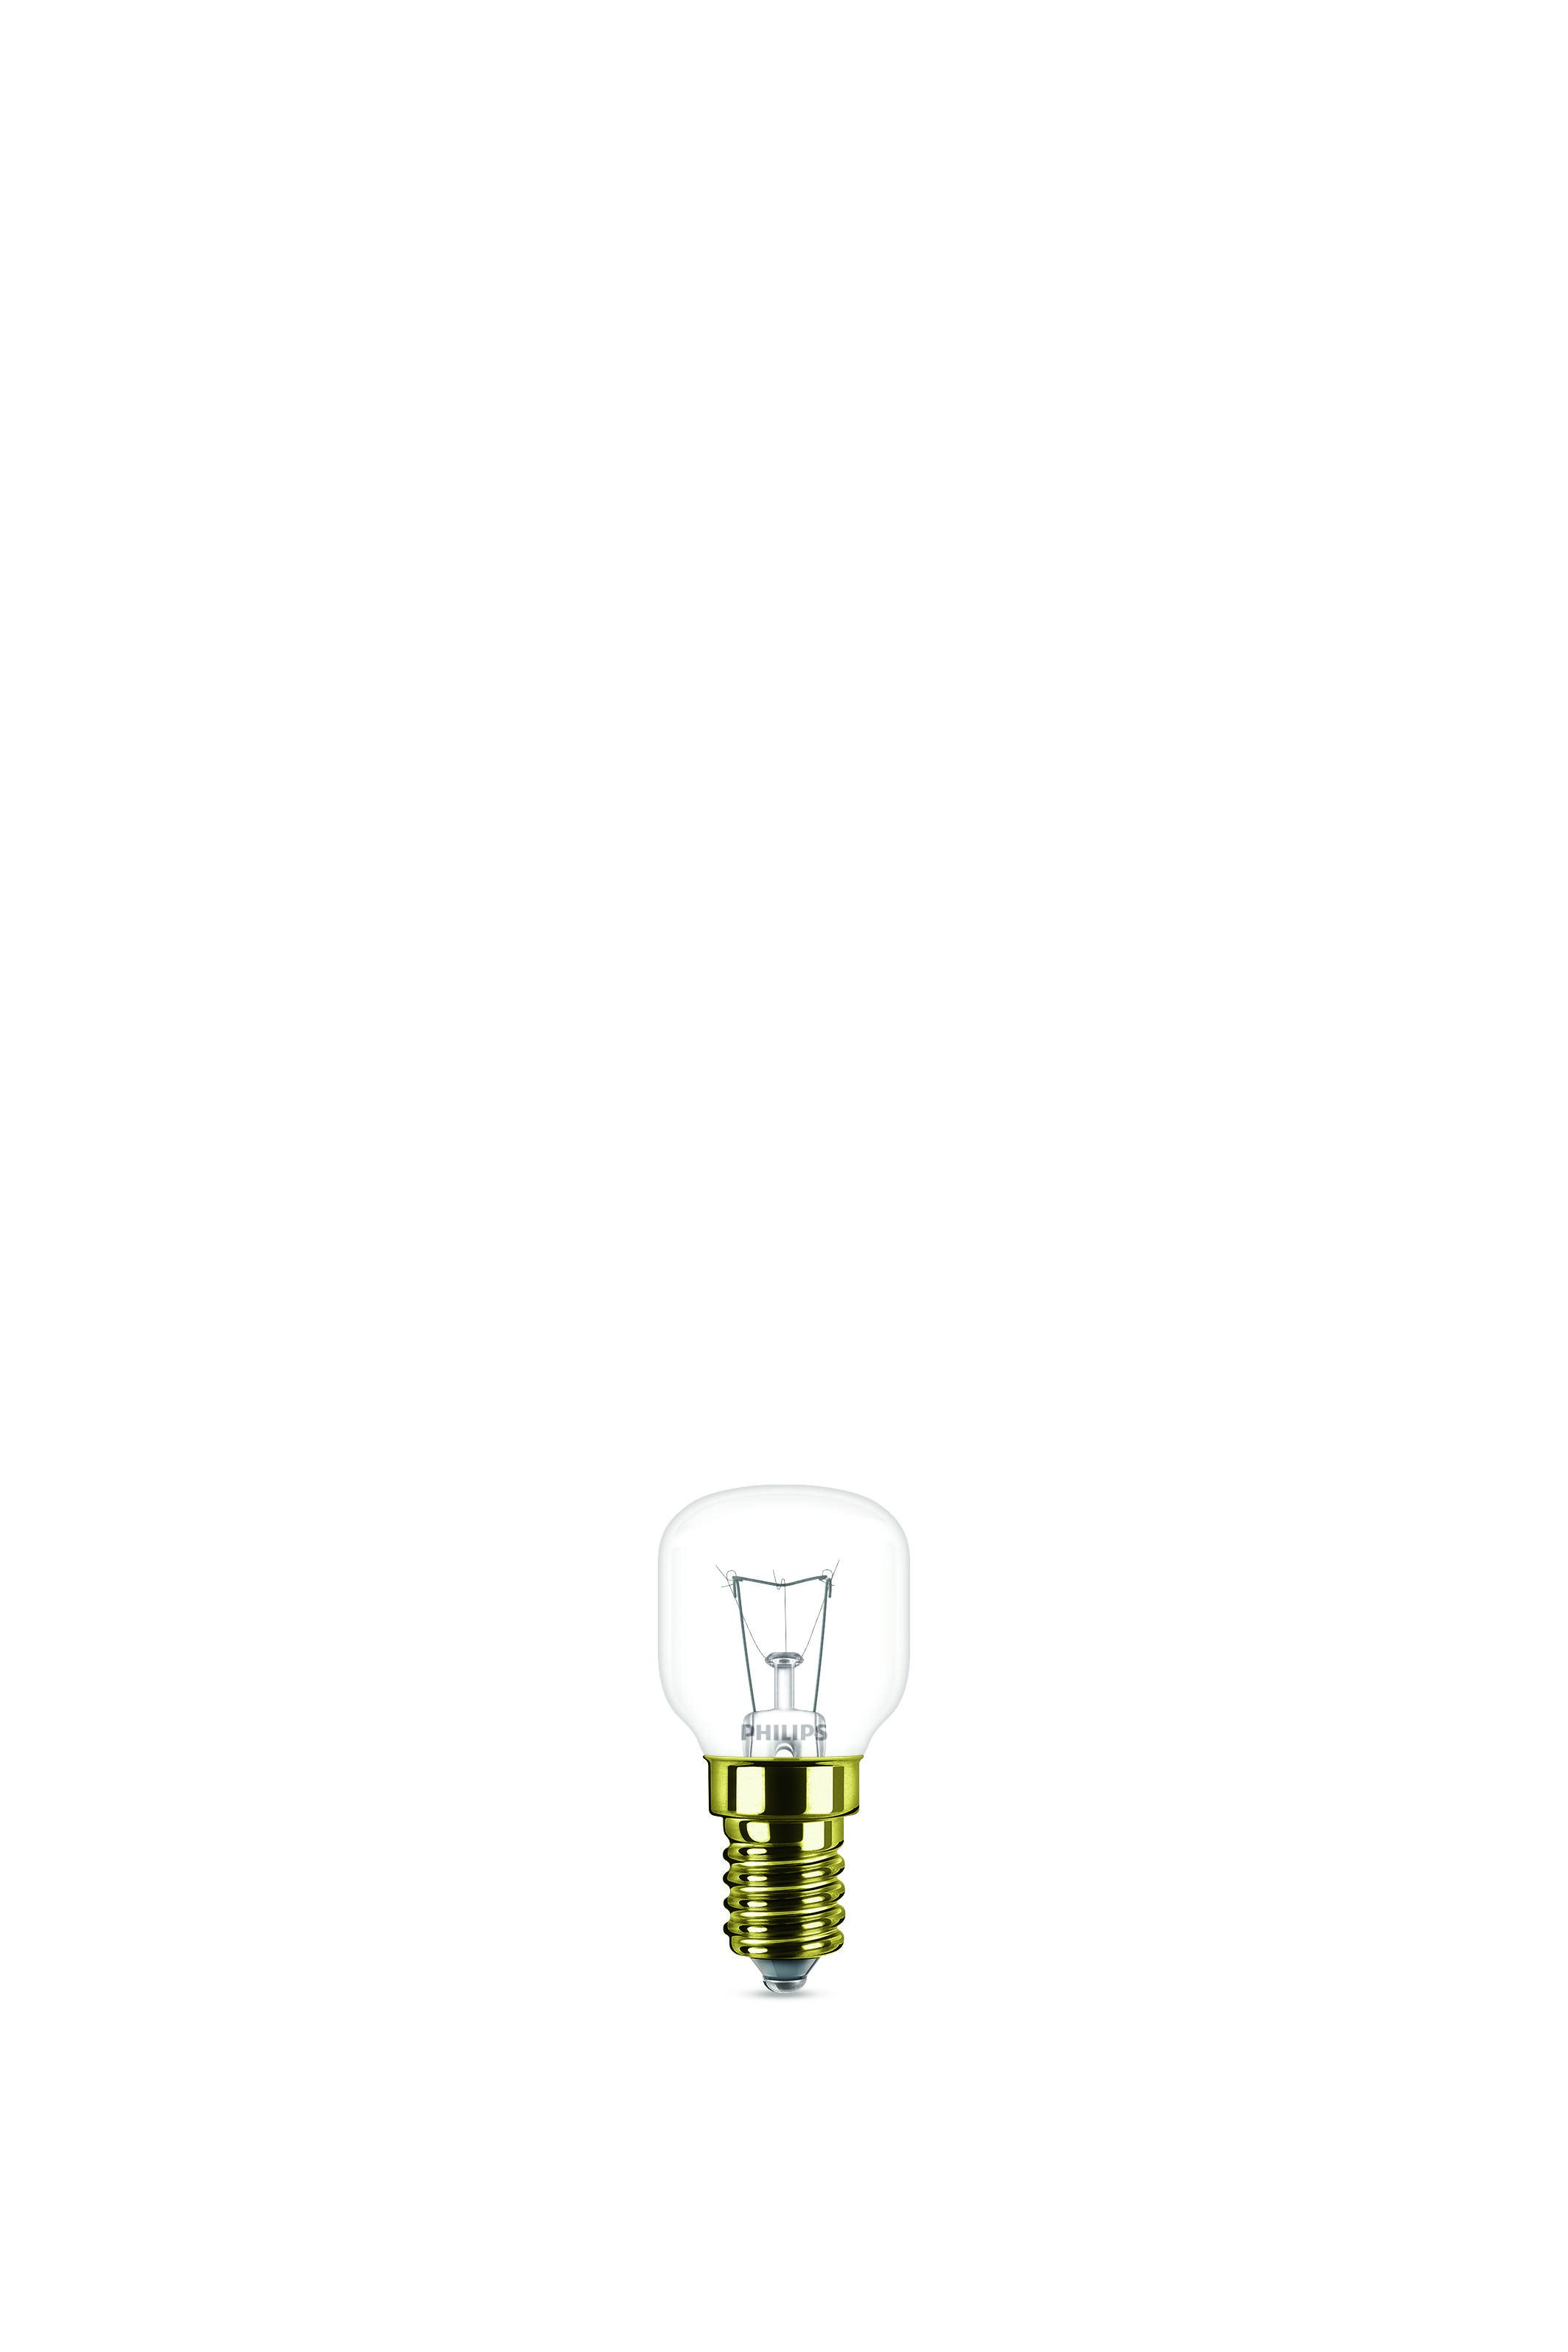 PHILIPS Glühlampe E14, 40 W, 300 lm, dimmbar